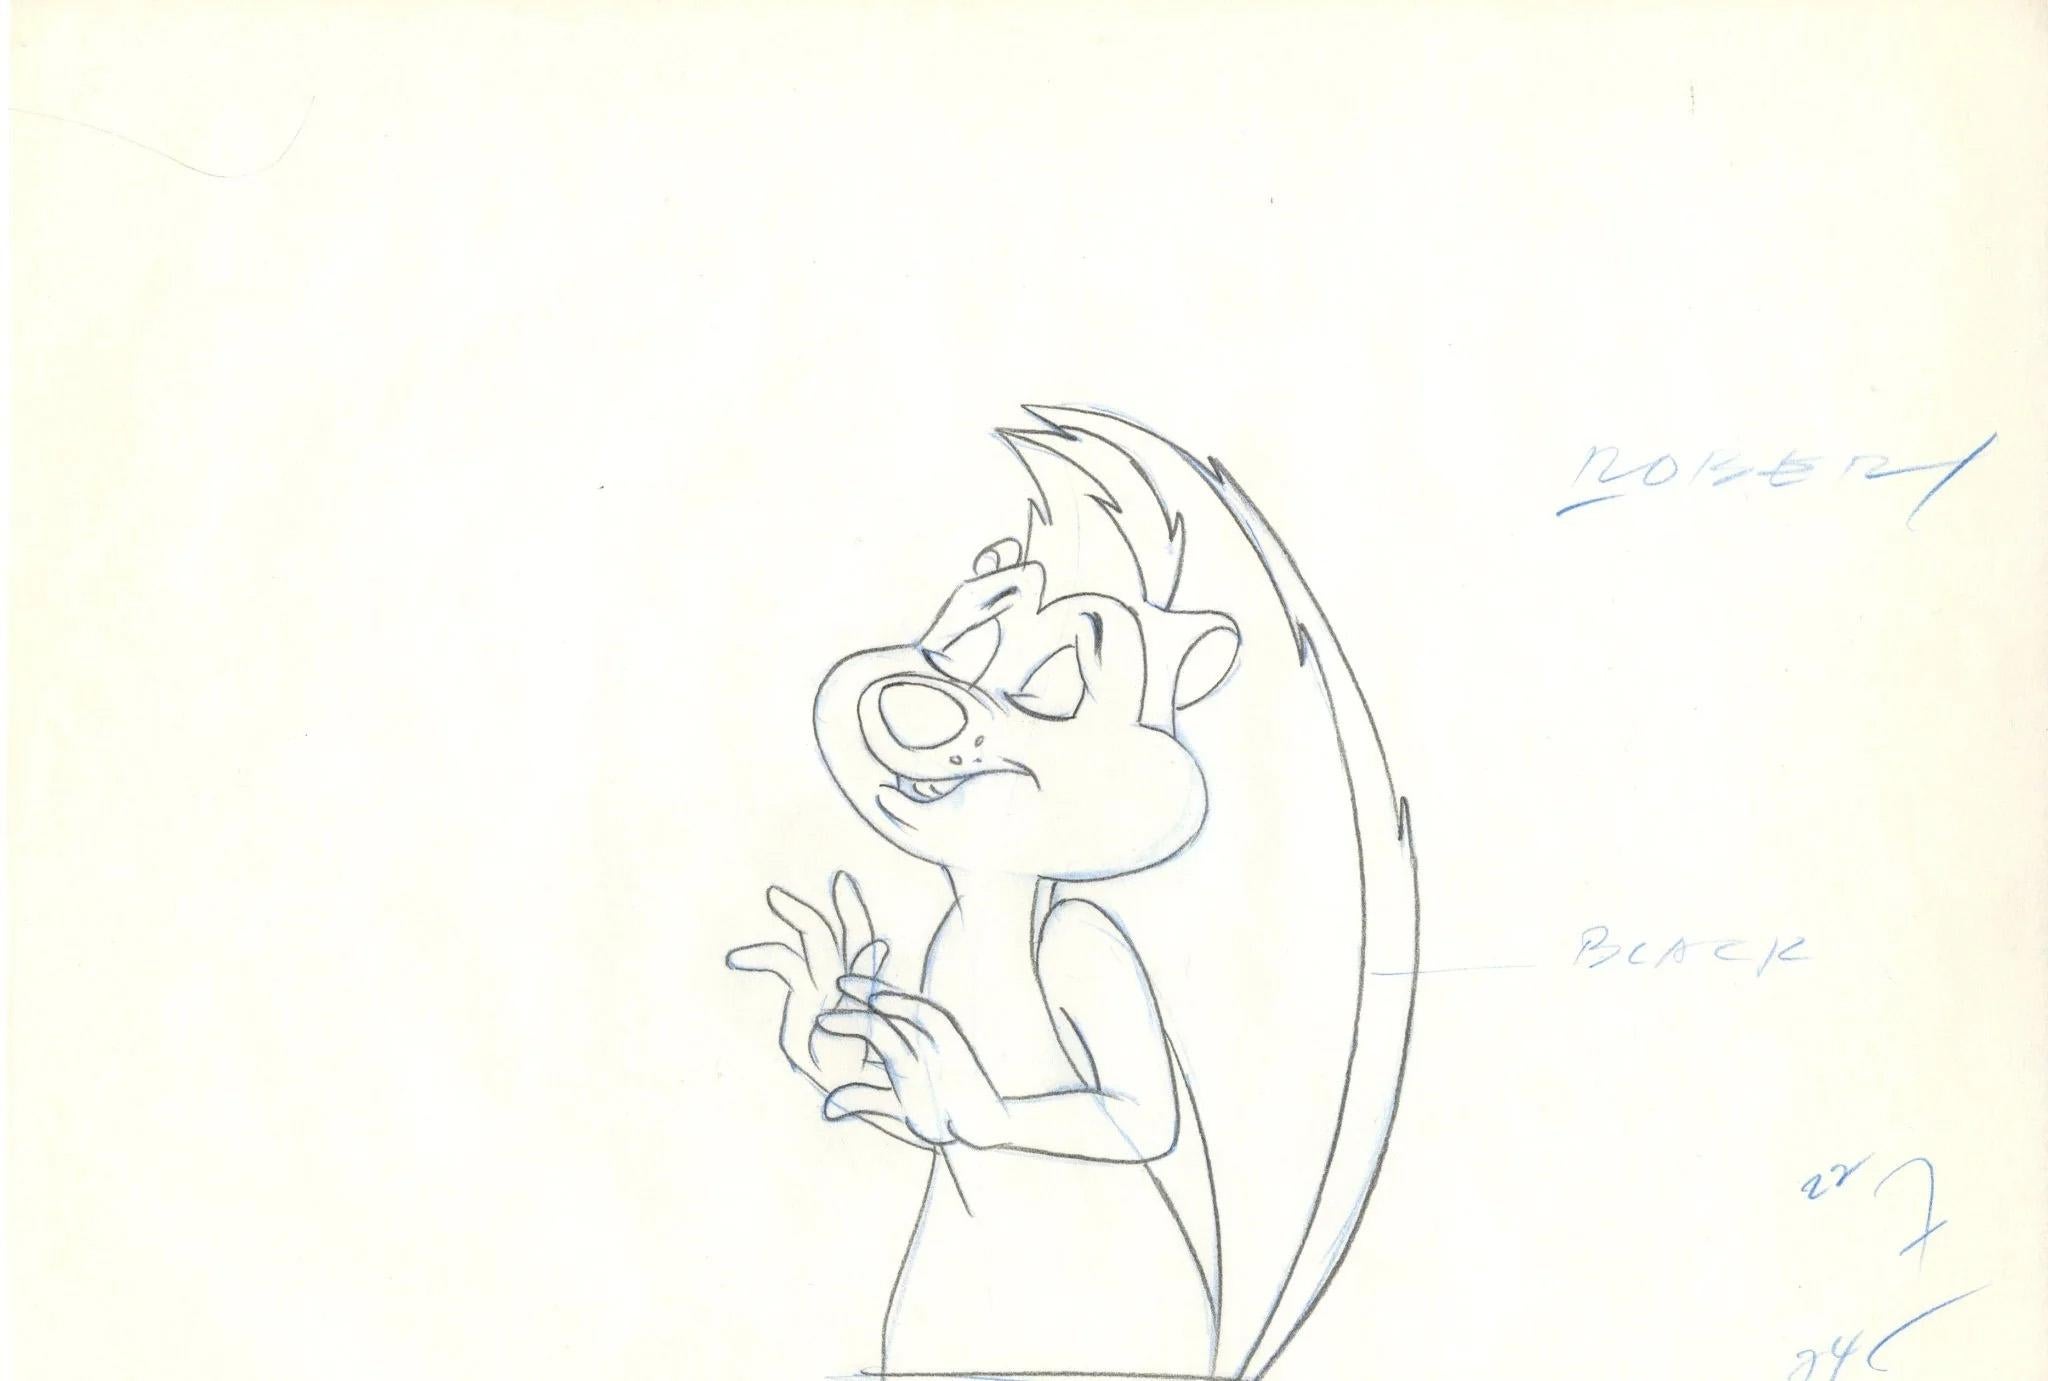 Looney Tunes Original Production Cel with Matching Drawing: Pepe - Pop Art Art by Looney Tunes Studio Artists